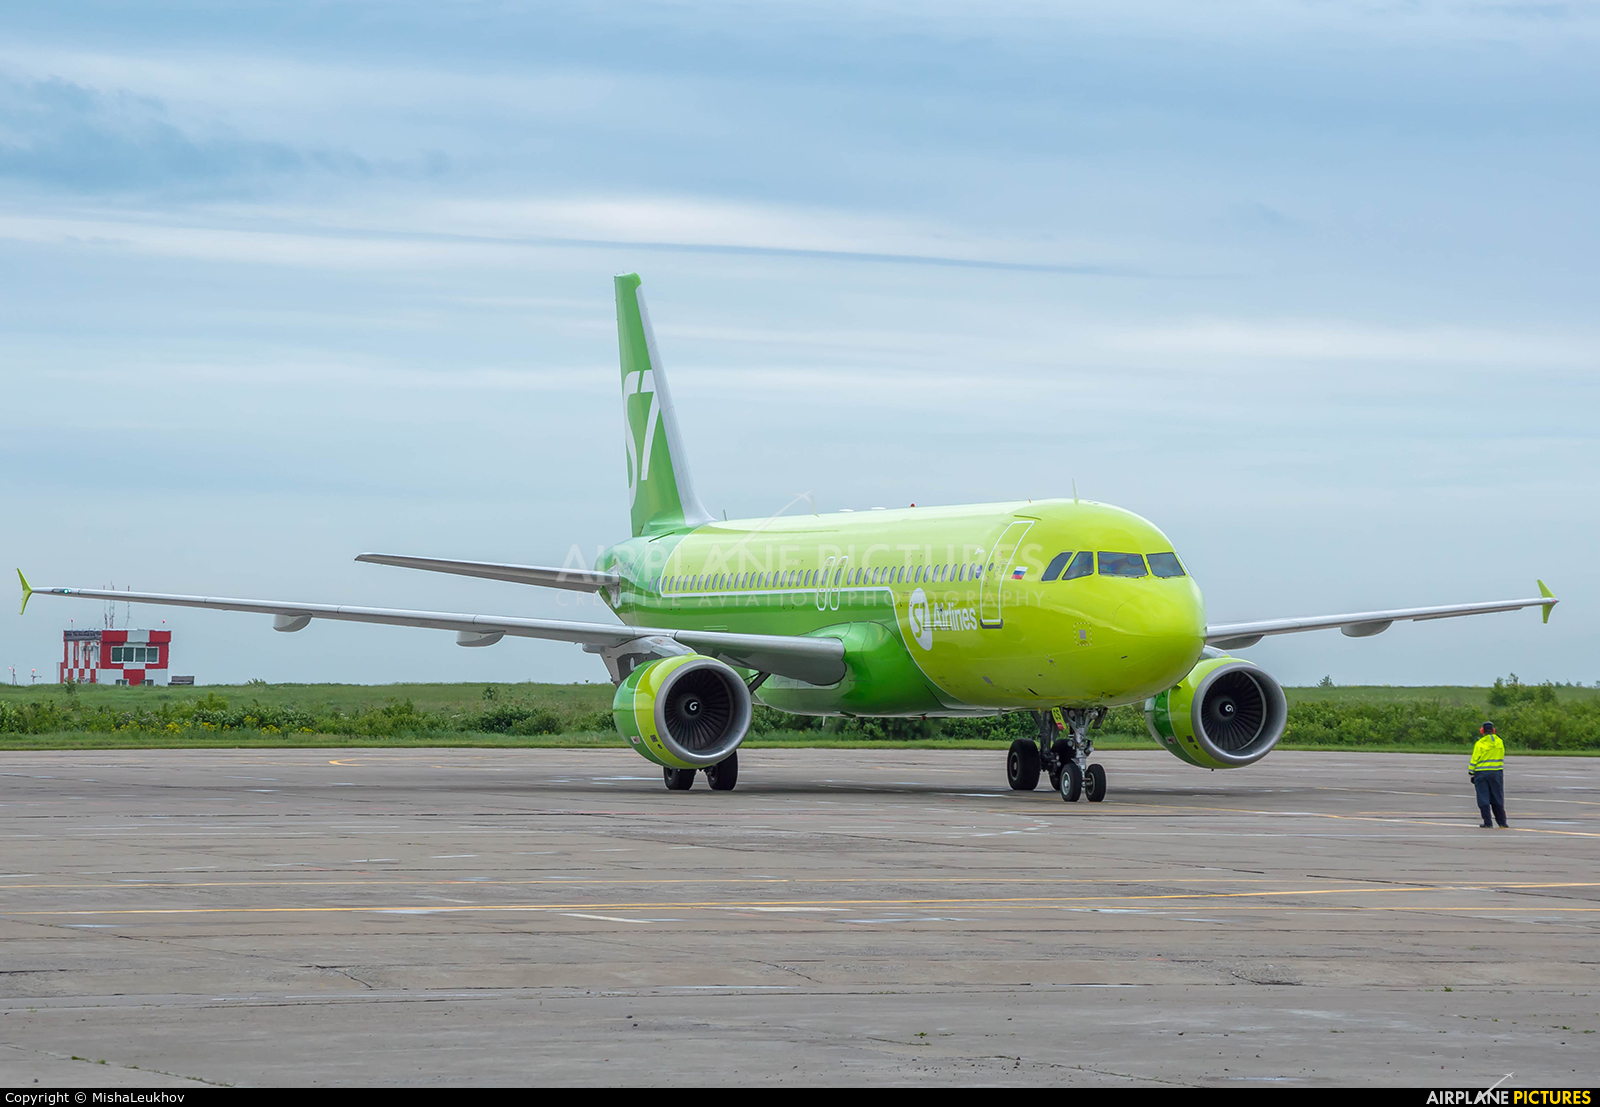 S7 Airlines VP-BCS aircraft at Kemerovo